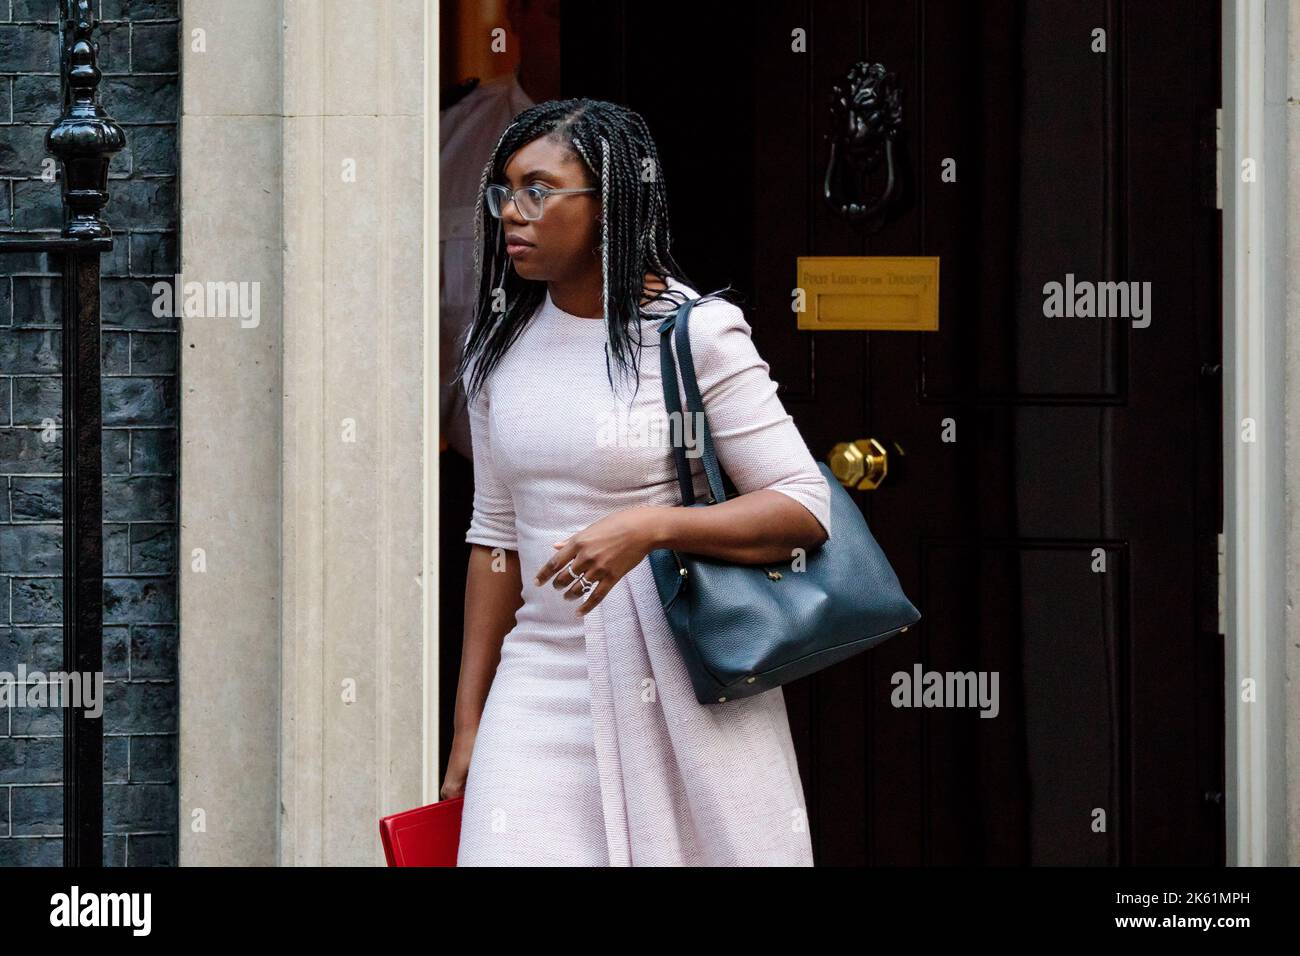 Downing Street, London, UK. 11th October 2022. Ministers attend the first Cabinet Meeting at 10 Downing Street since the Conservative Party Conference last week. Kemi Badenoch MP, Secretary of State for International Trade and President of the Board of Trade. Amanda Rose/Alamy Live News Stock Photo